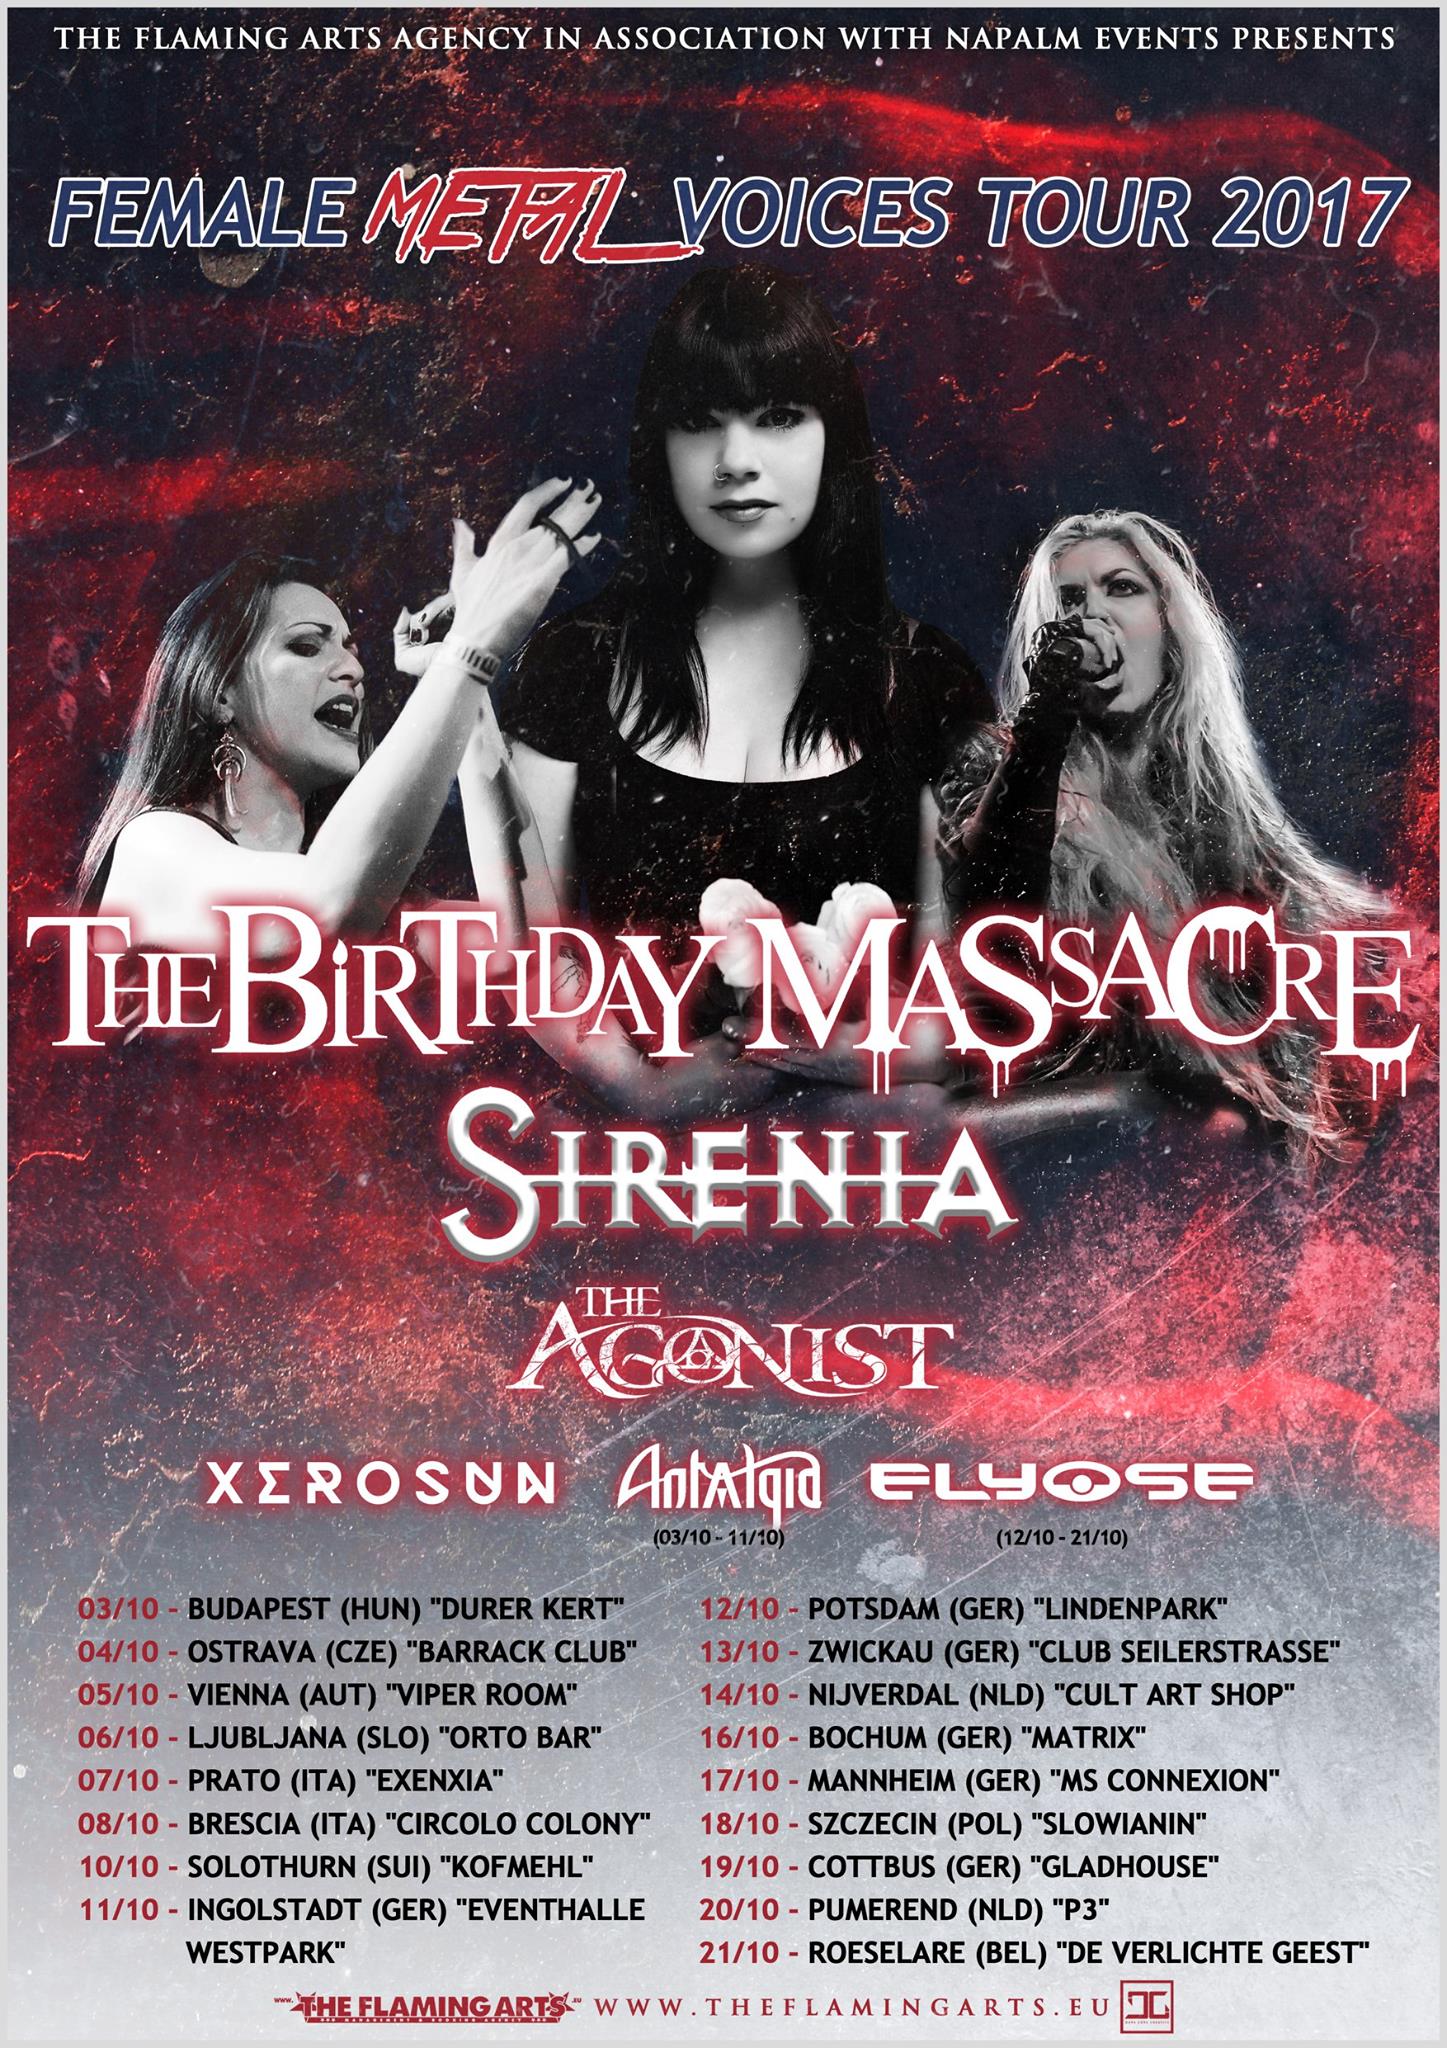 Female Metal Voices Tour 2017 Xerosun supporting The Birthday Massacre, Sirenia and The Agonist